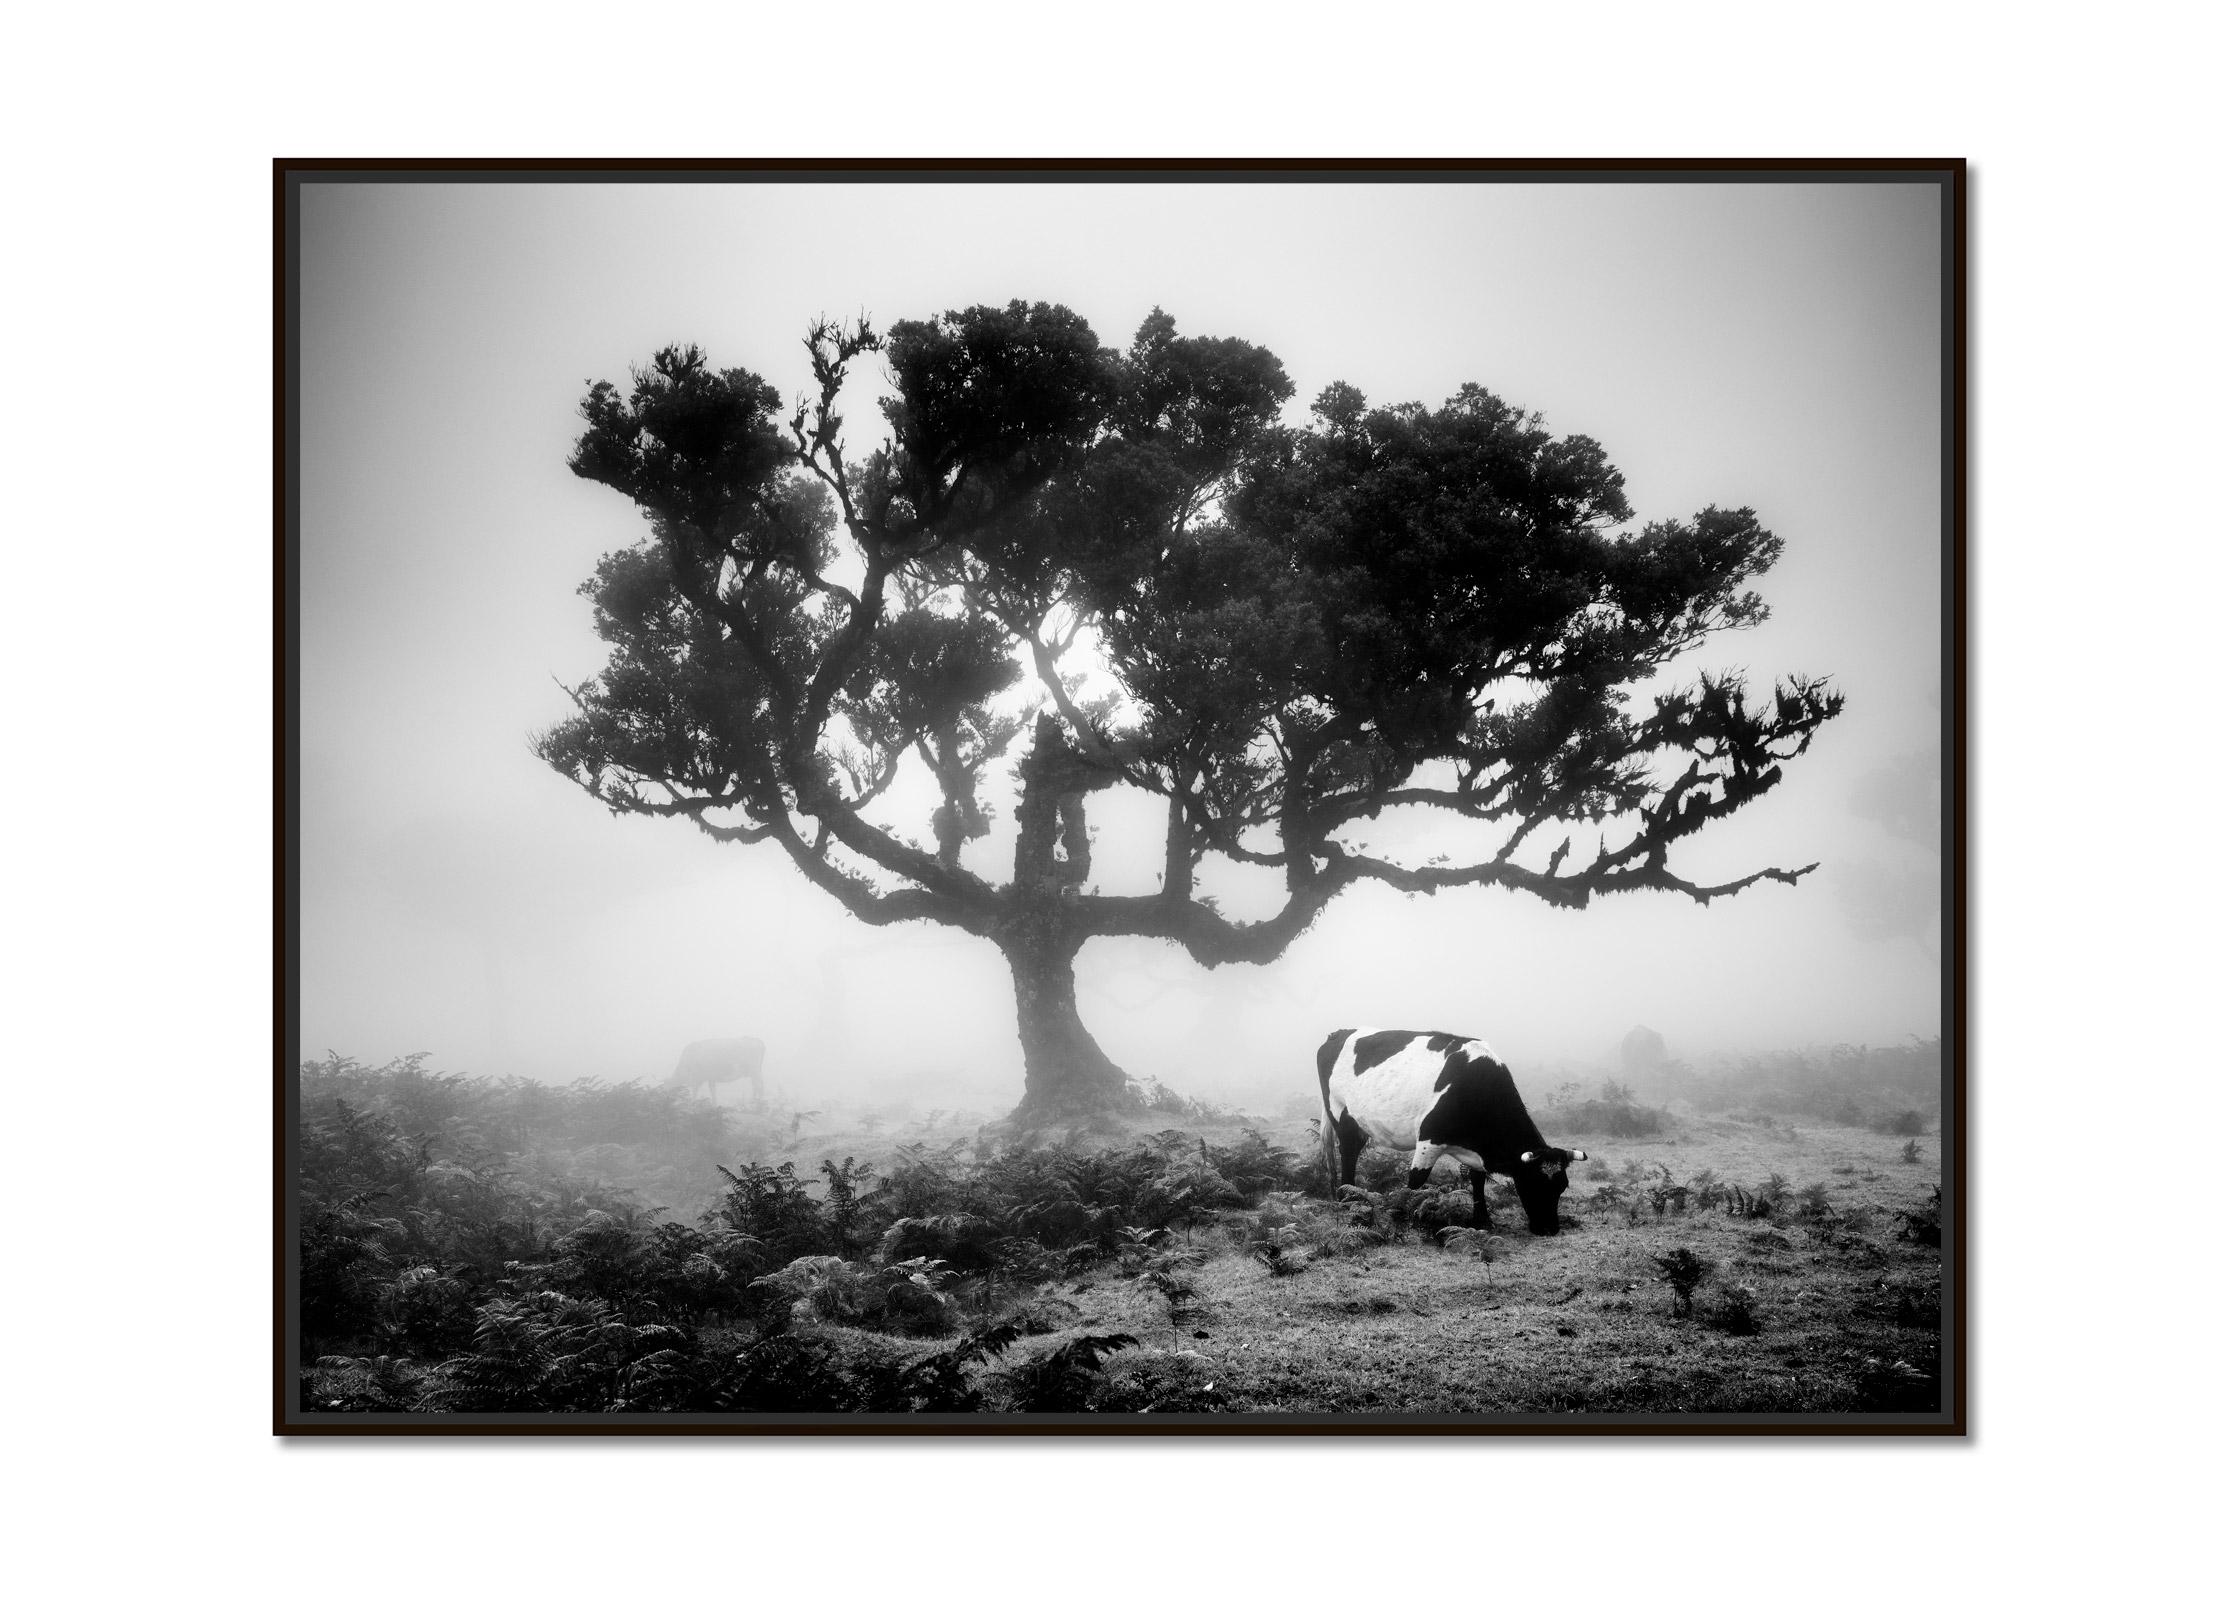 Cows on the foggy Pasture, fairy Forest, black and white photography, landscape - Photograph by Gerald Berghammer